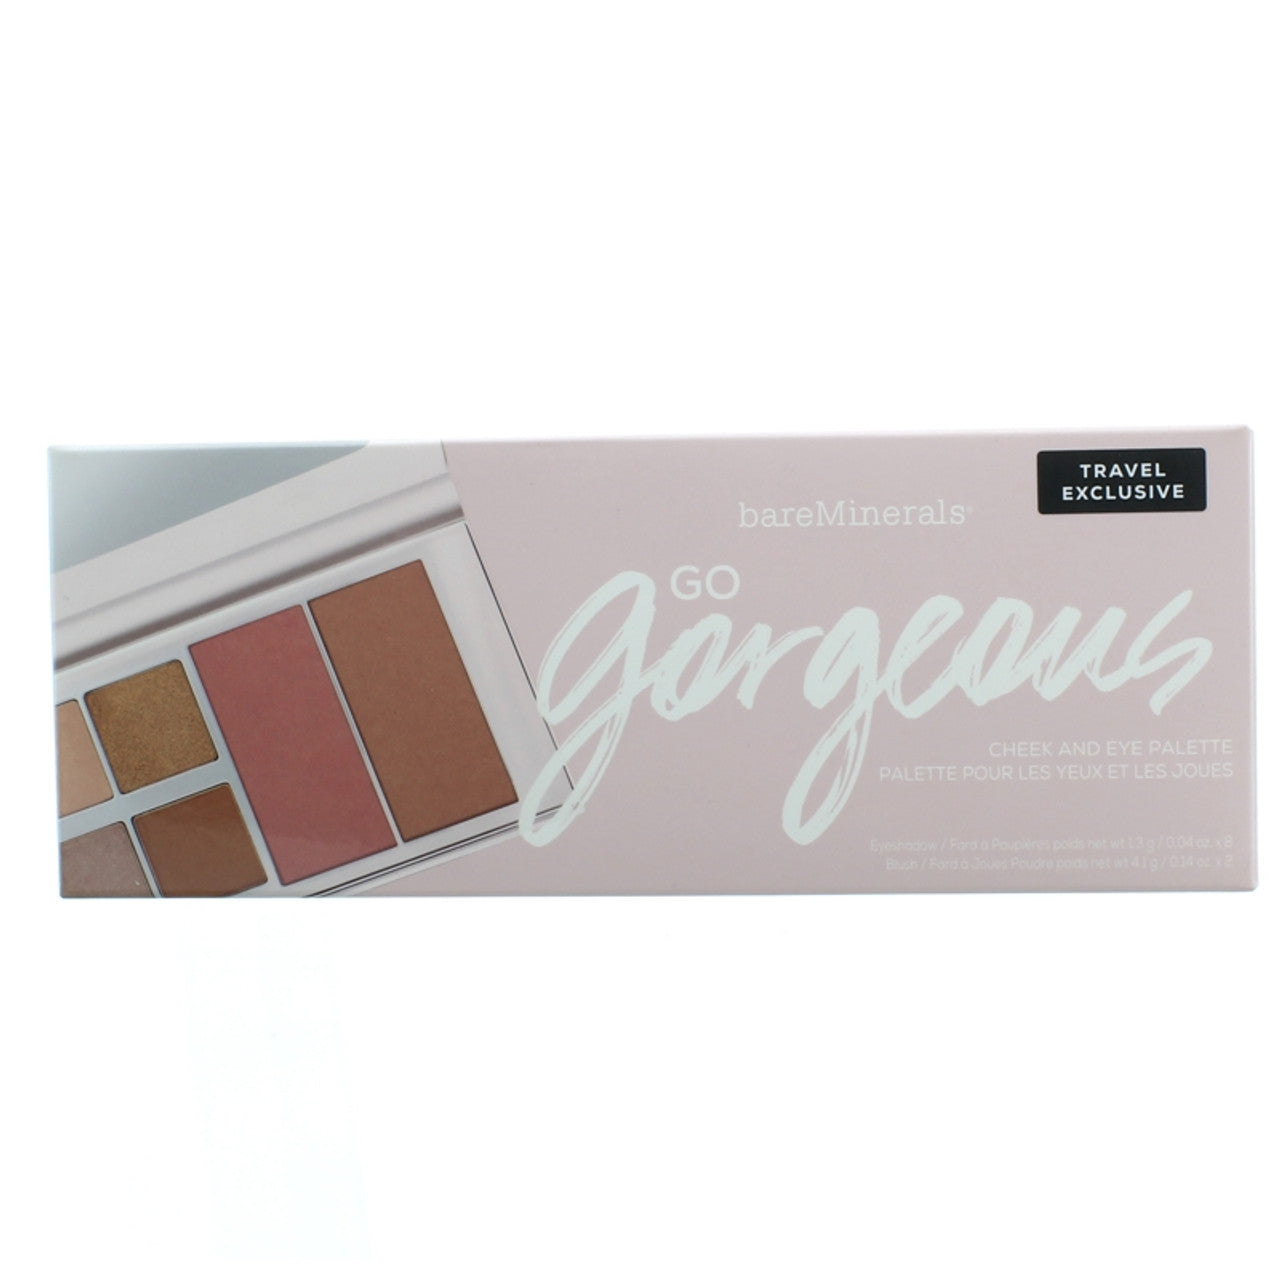 Go Gorgeous Check And Eye Palette: Ombretto*8 13 Gr + Blush*2 4.1 Gr